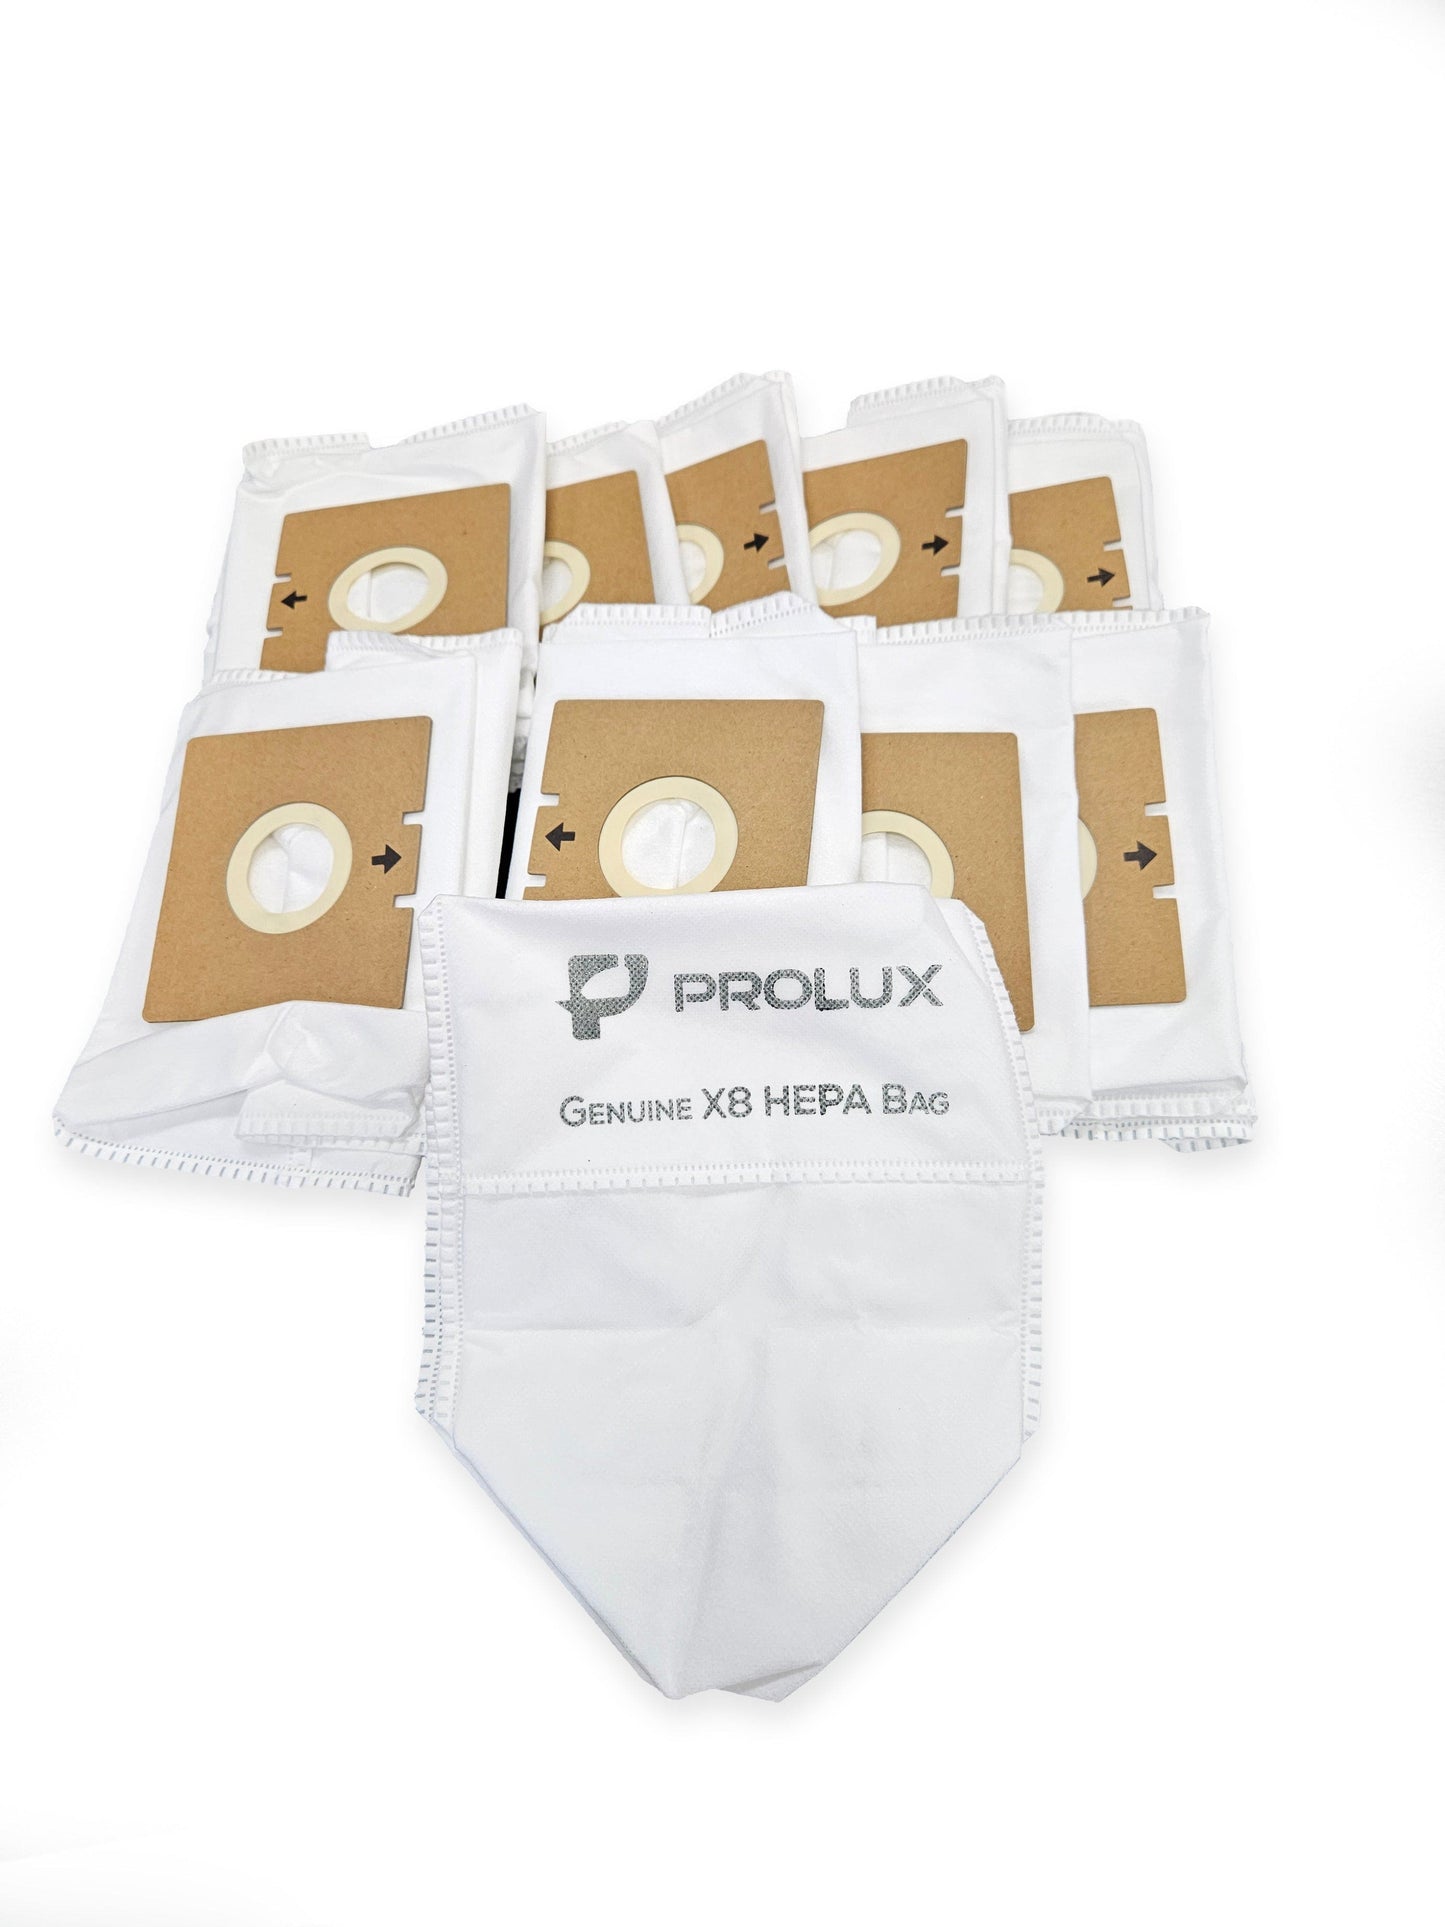 10pk of Bags for the Prolux X8 Backpack Vacuum